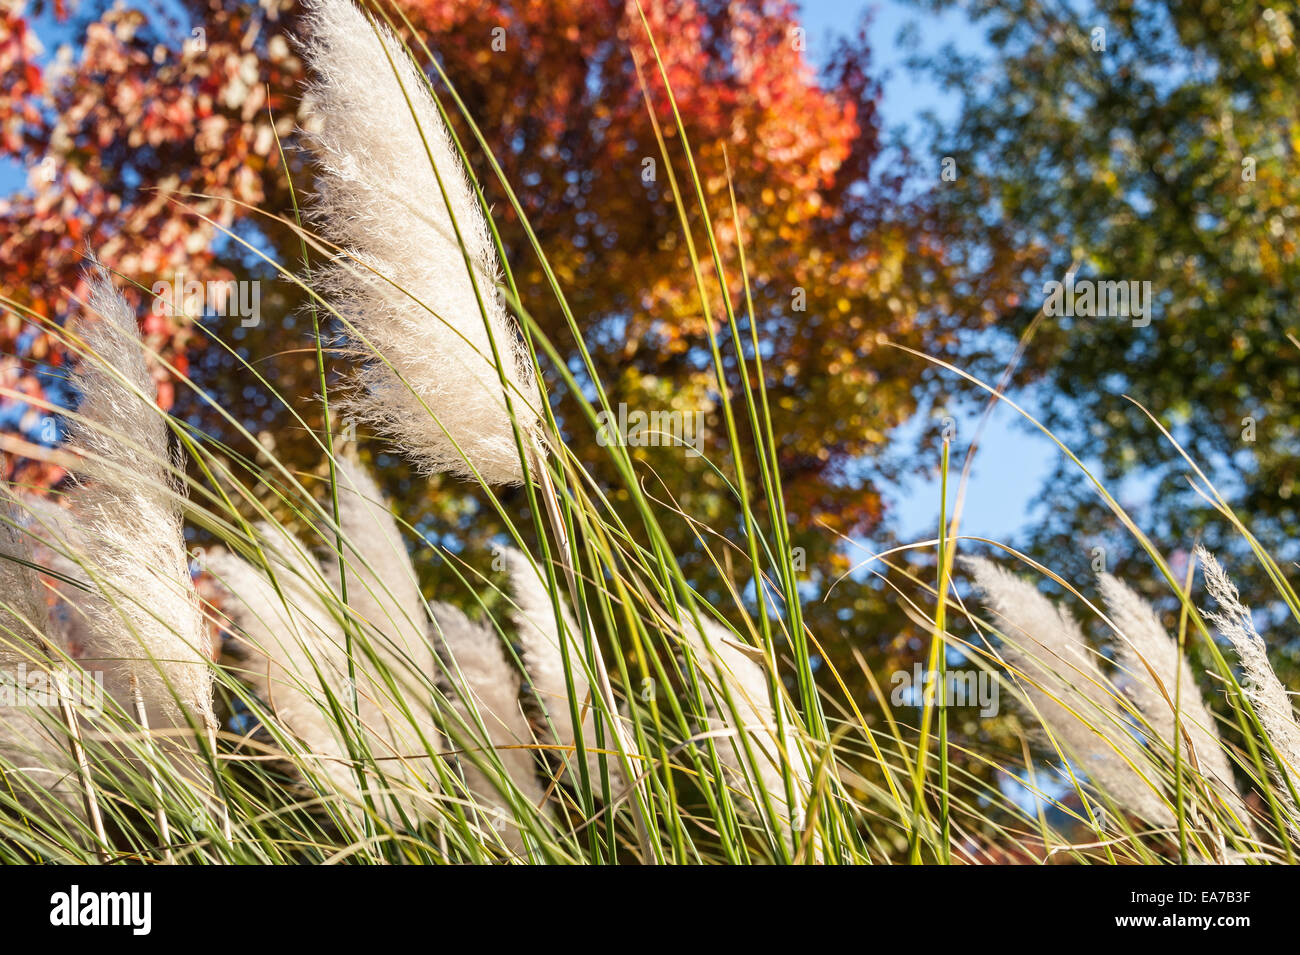 Beautiful sunlit pampas grass against a background of colorful Autumn leaves at Stone Mountain Park in Atlanta, Georgia, USA. Stock Photo